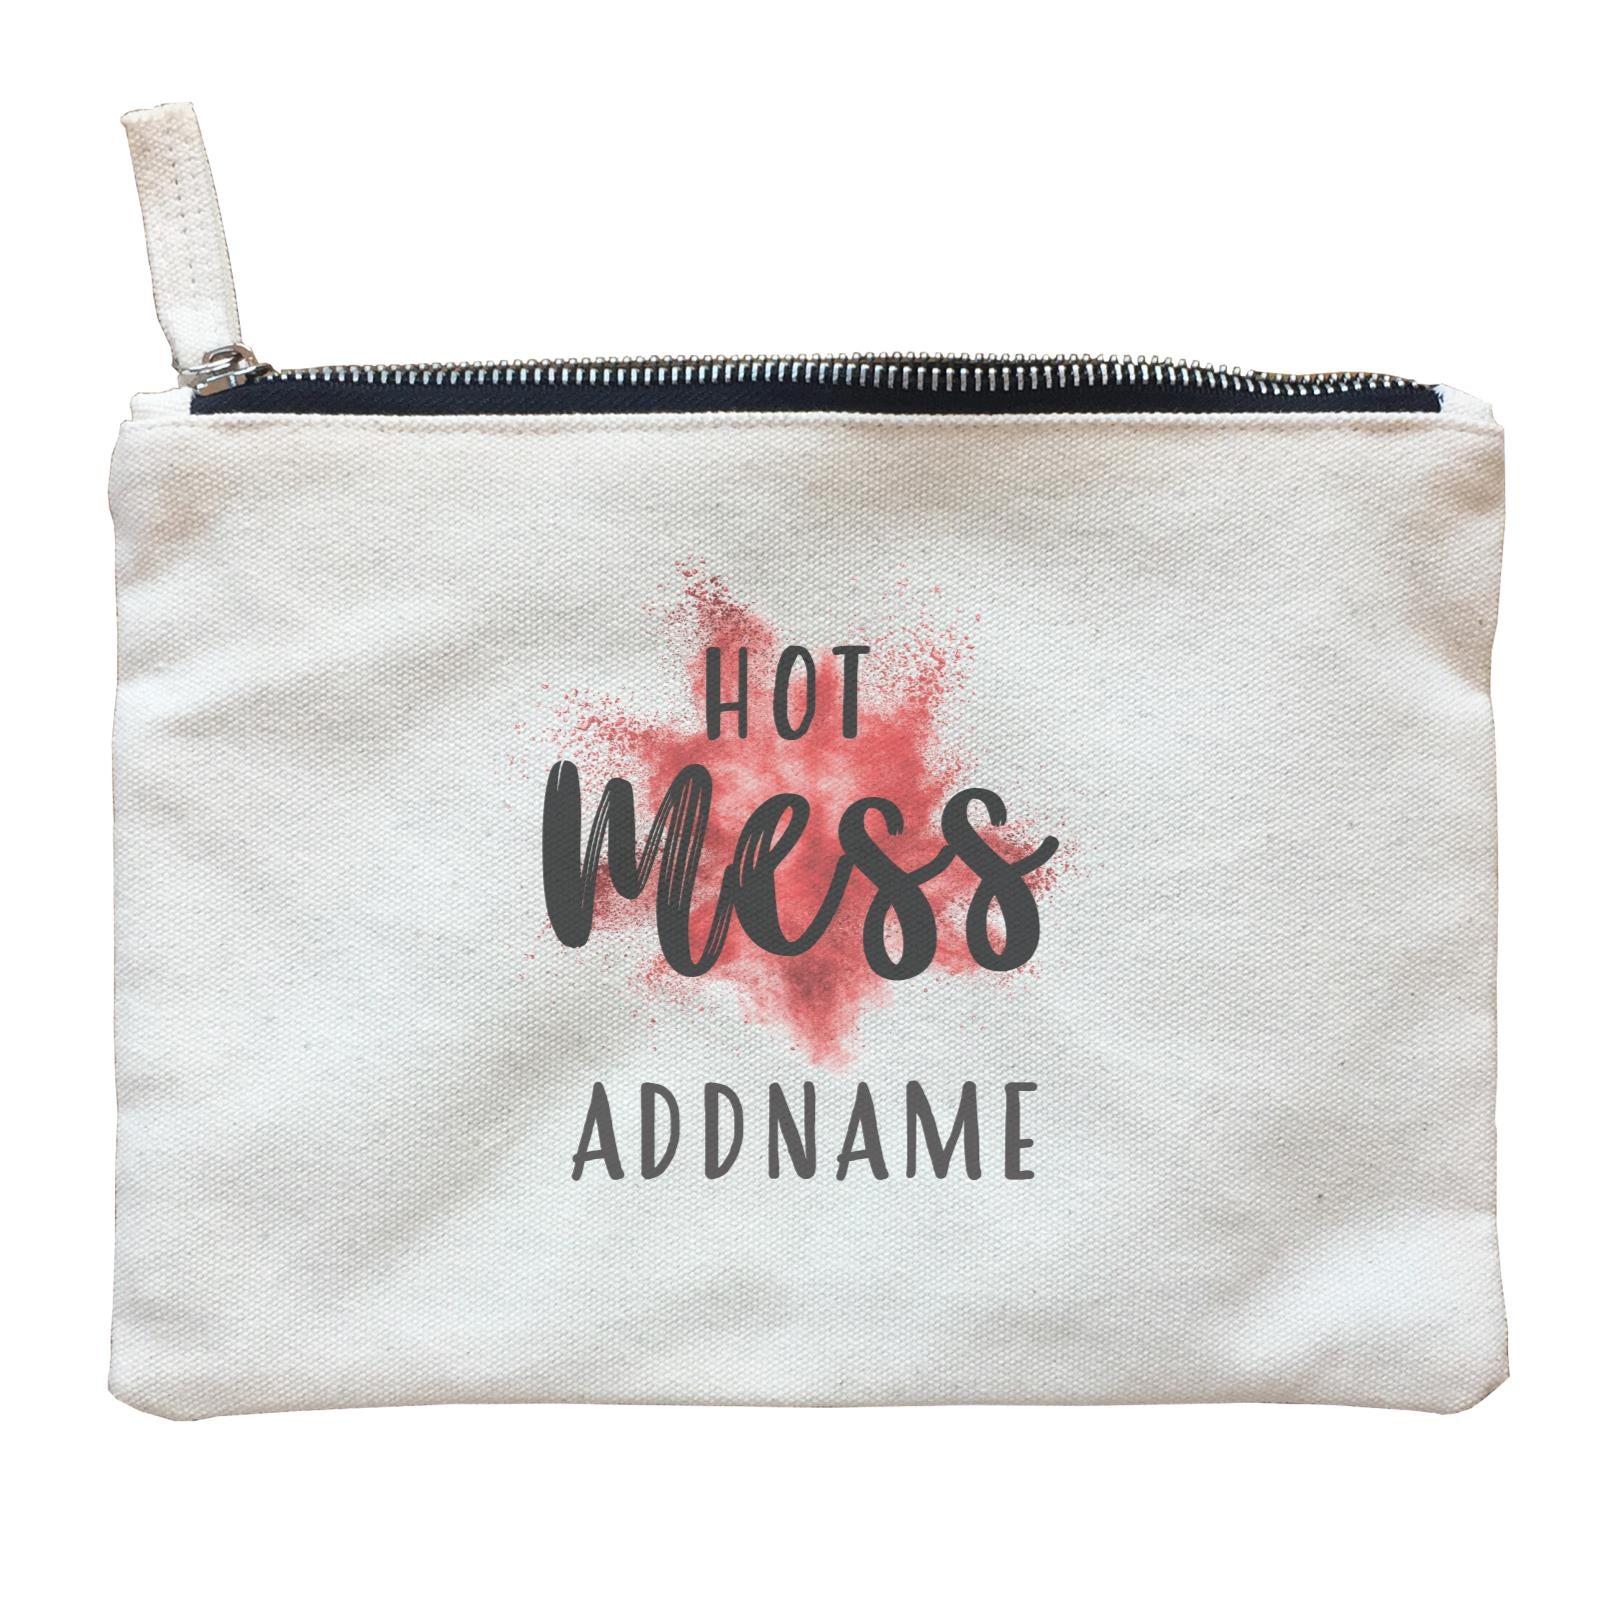 Make Up Quotes Hot Mess Addname Zipper Pouch